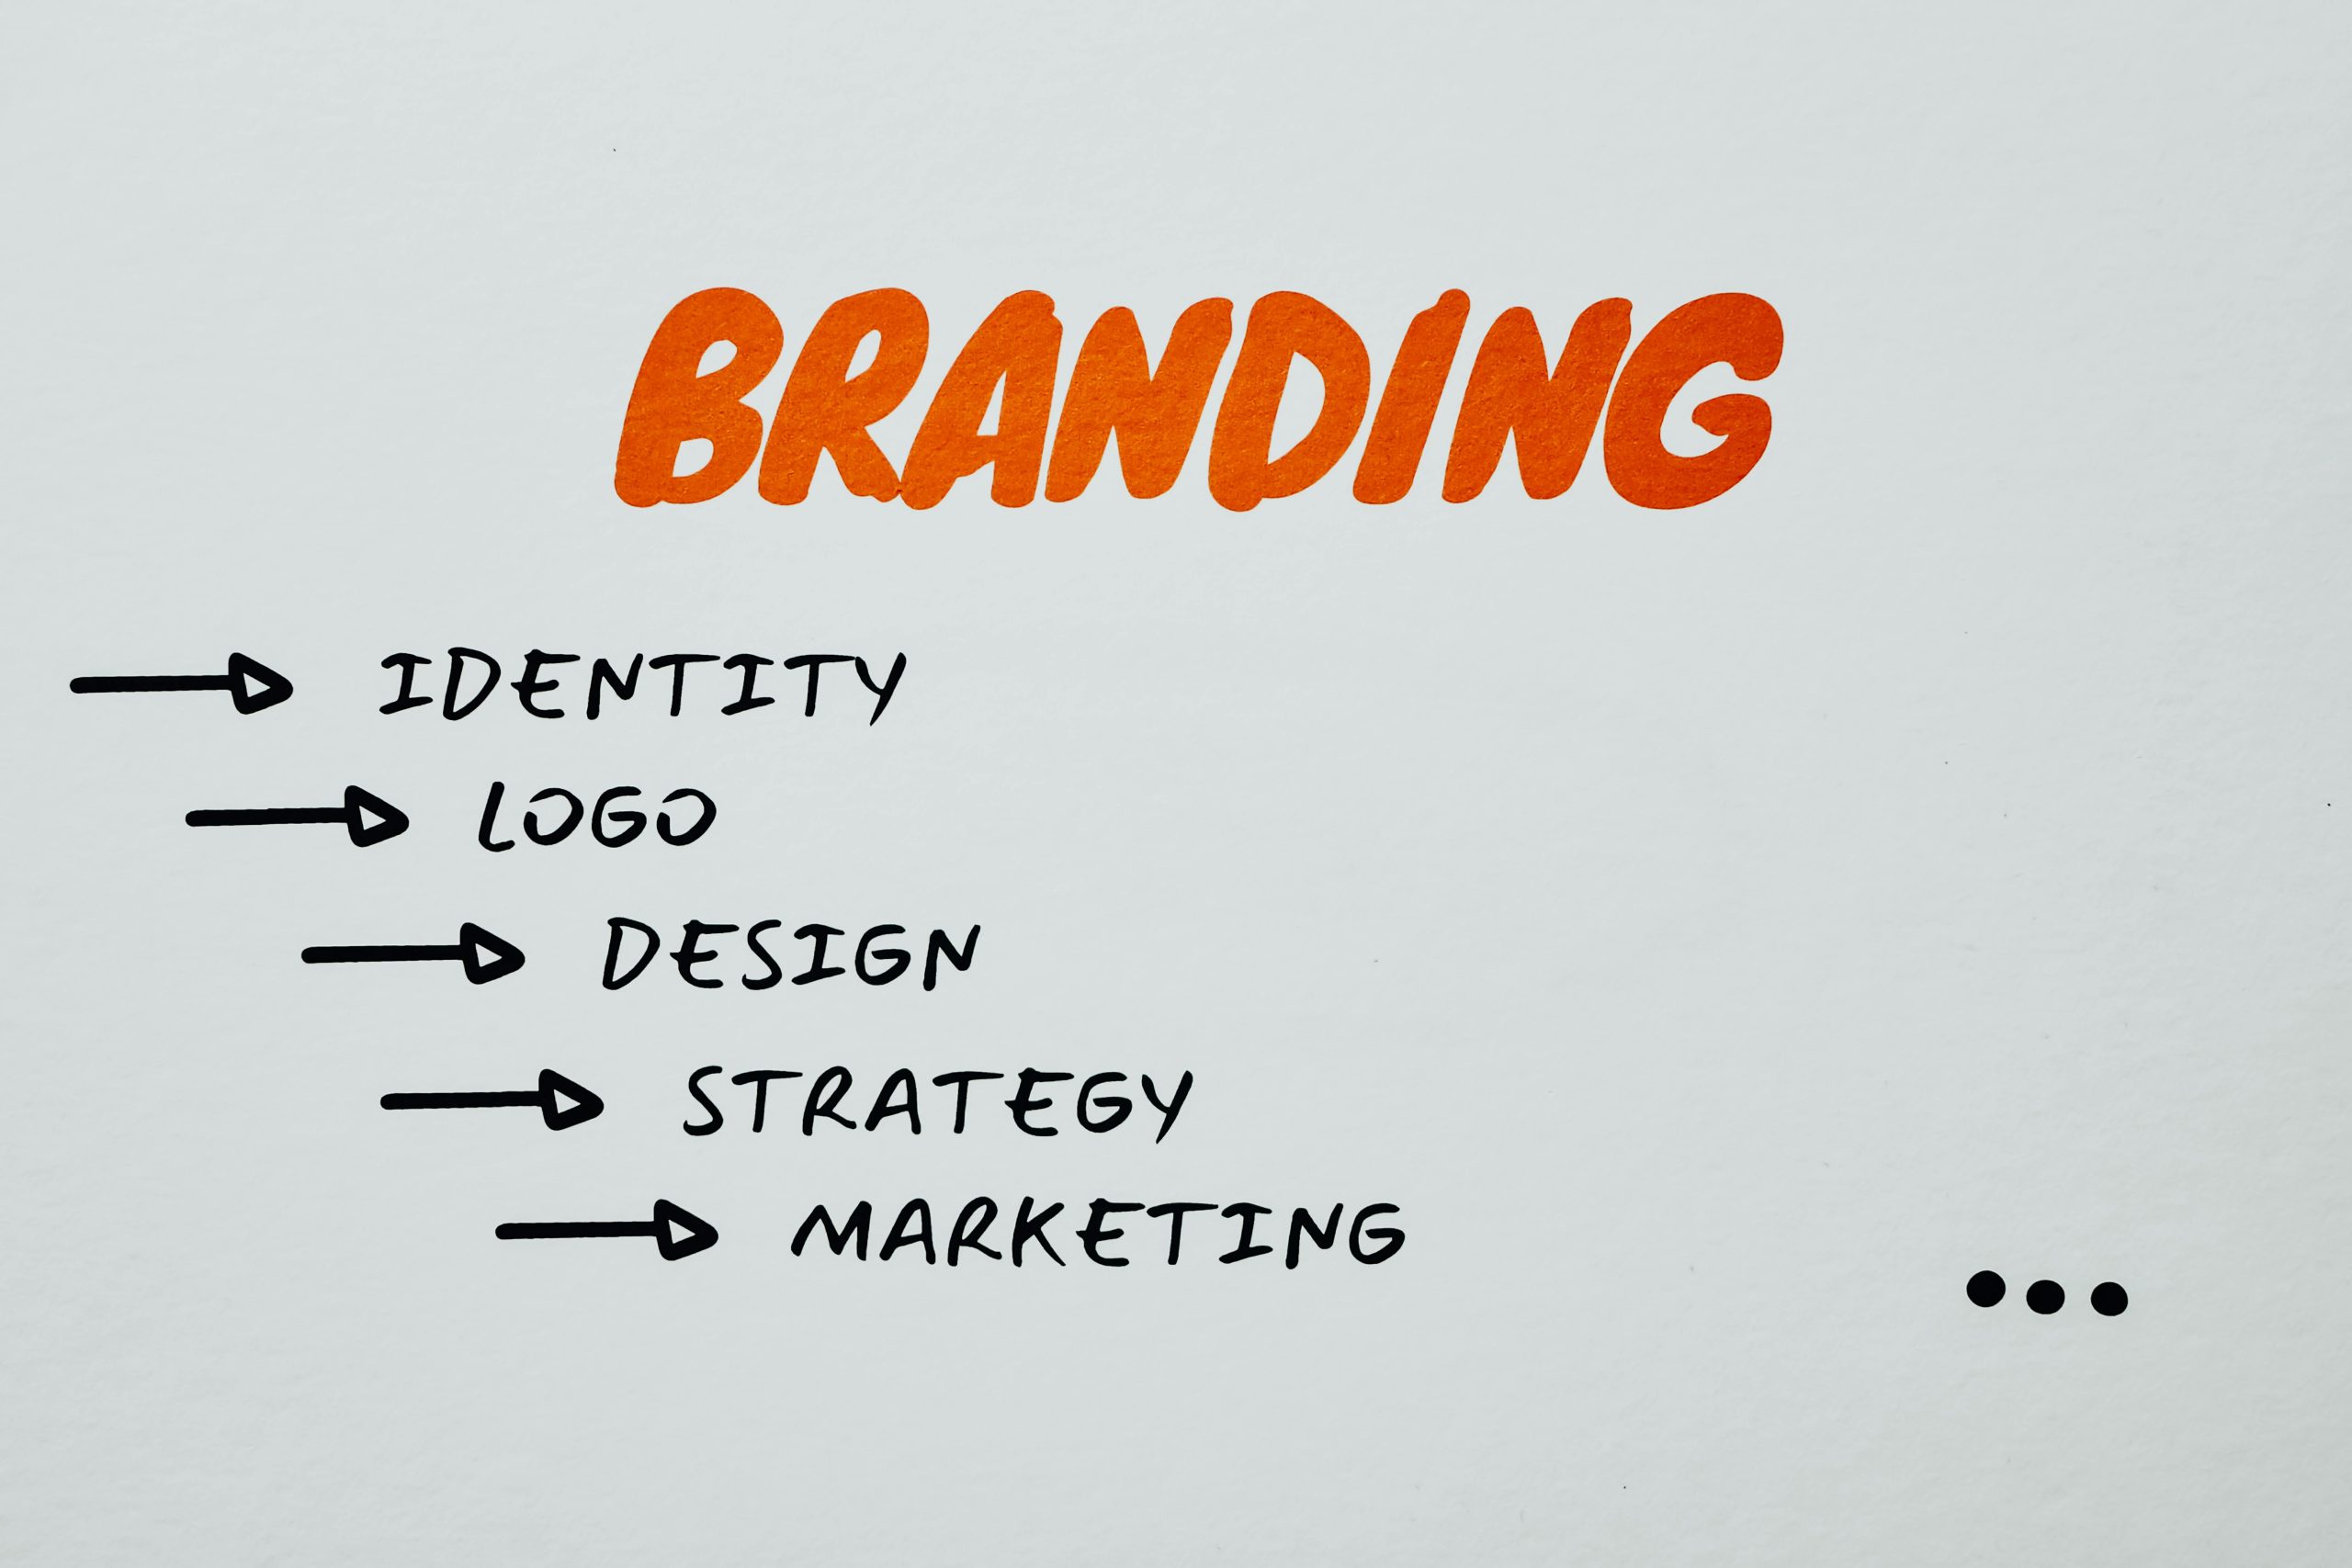 The Art of Branding: How Strong Business Identity Drives Sales